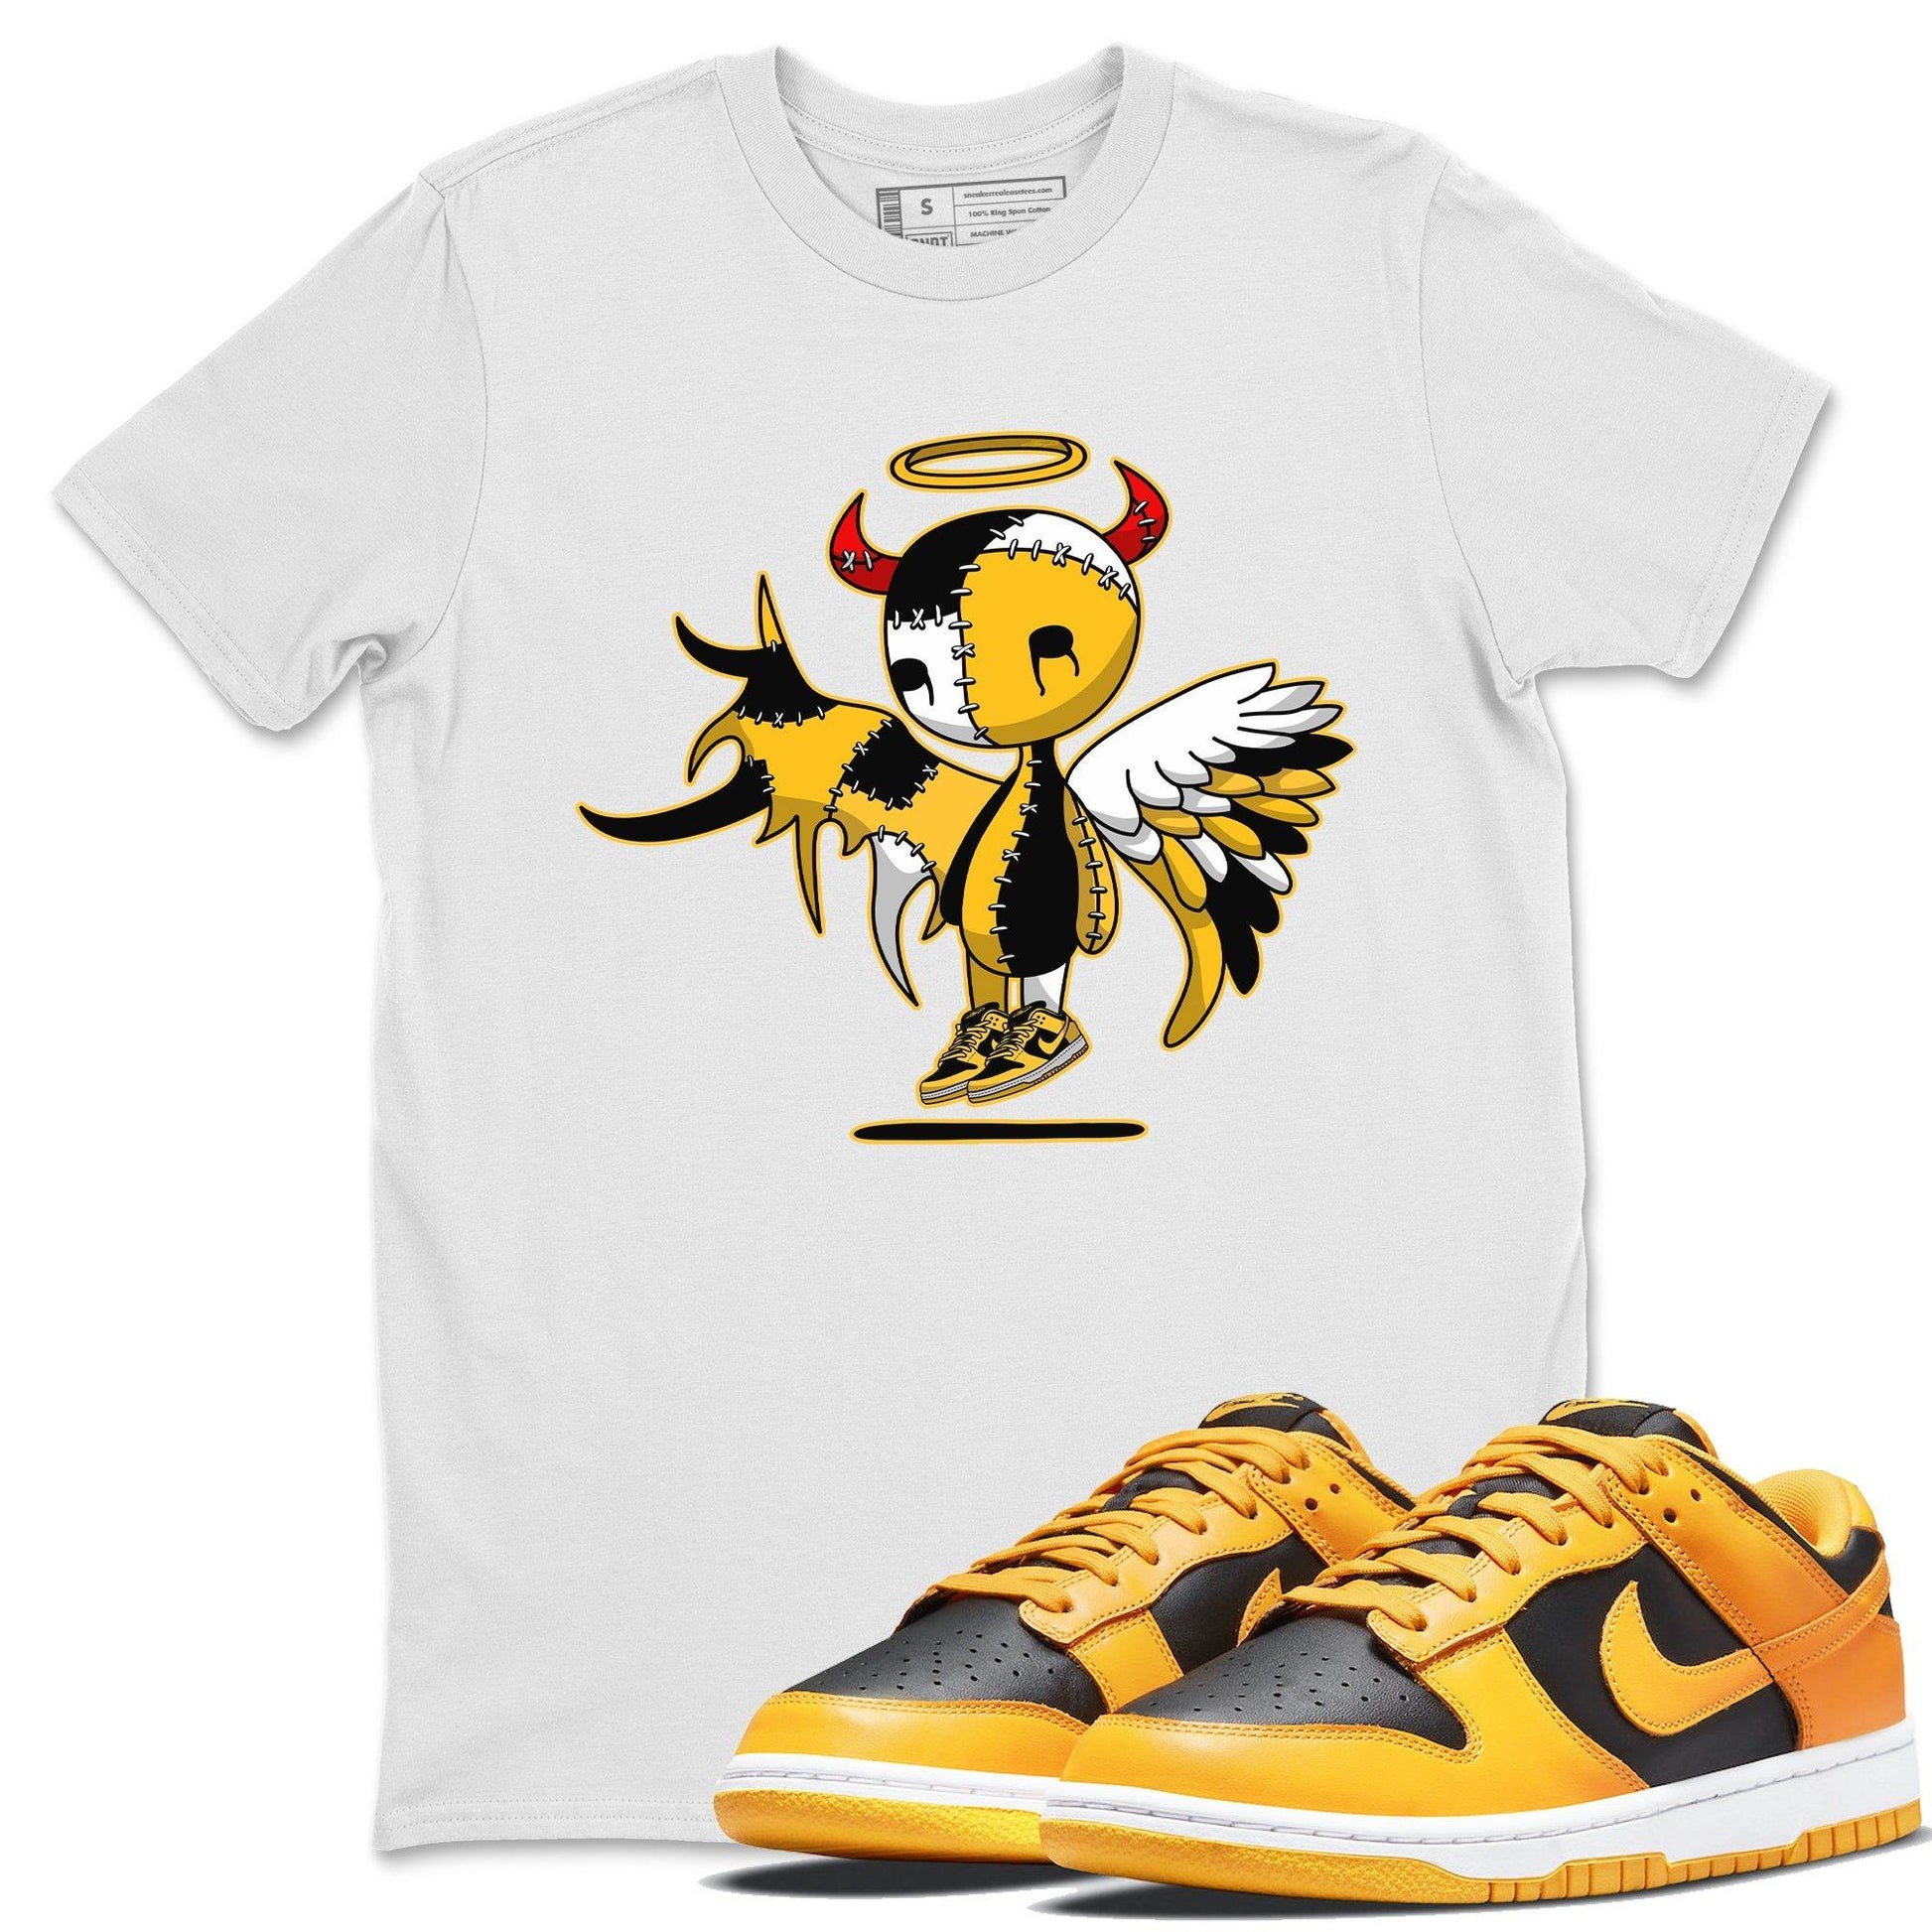 Dunk Championship Goldenrod Sneaker Match Tees Devil Angel Sneaker Tees Dunk Championship Goldenrod Sneaker Release Tees Unisex Shirts